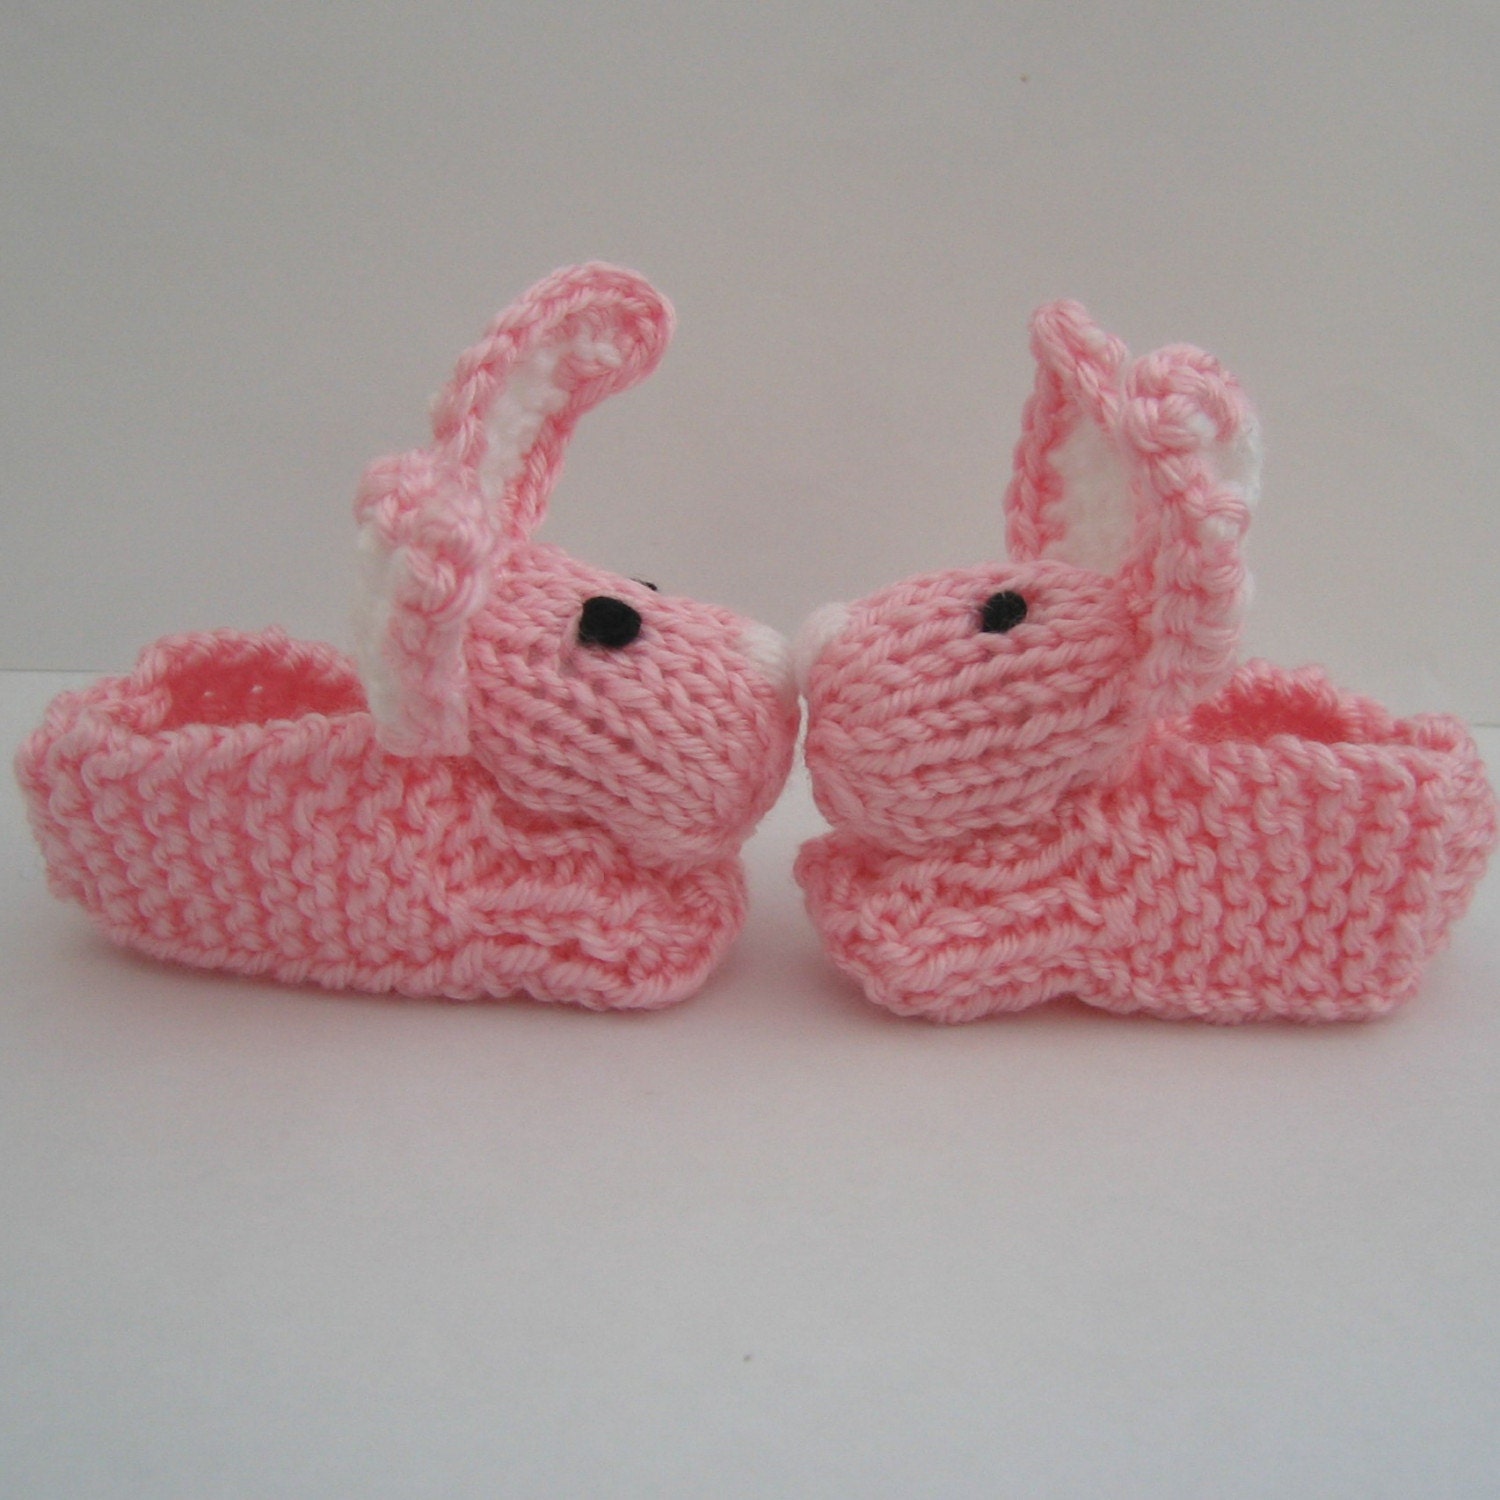 Itty Bitty Baby Pink Bunny Slippers - 0 to 6 month size